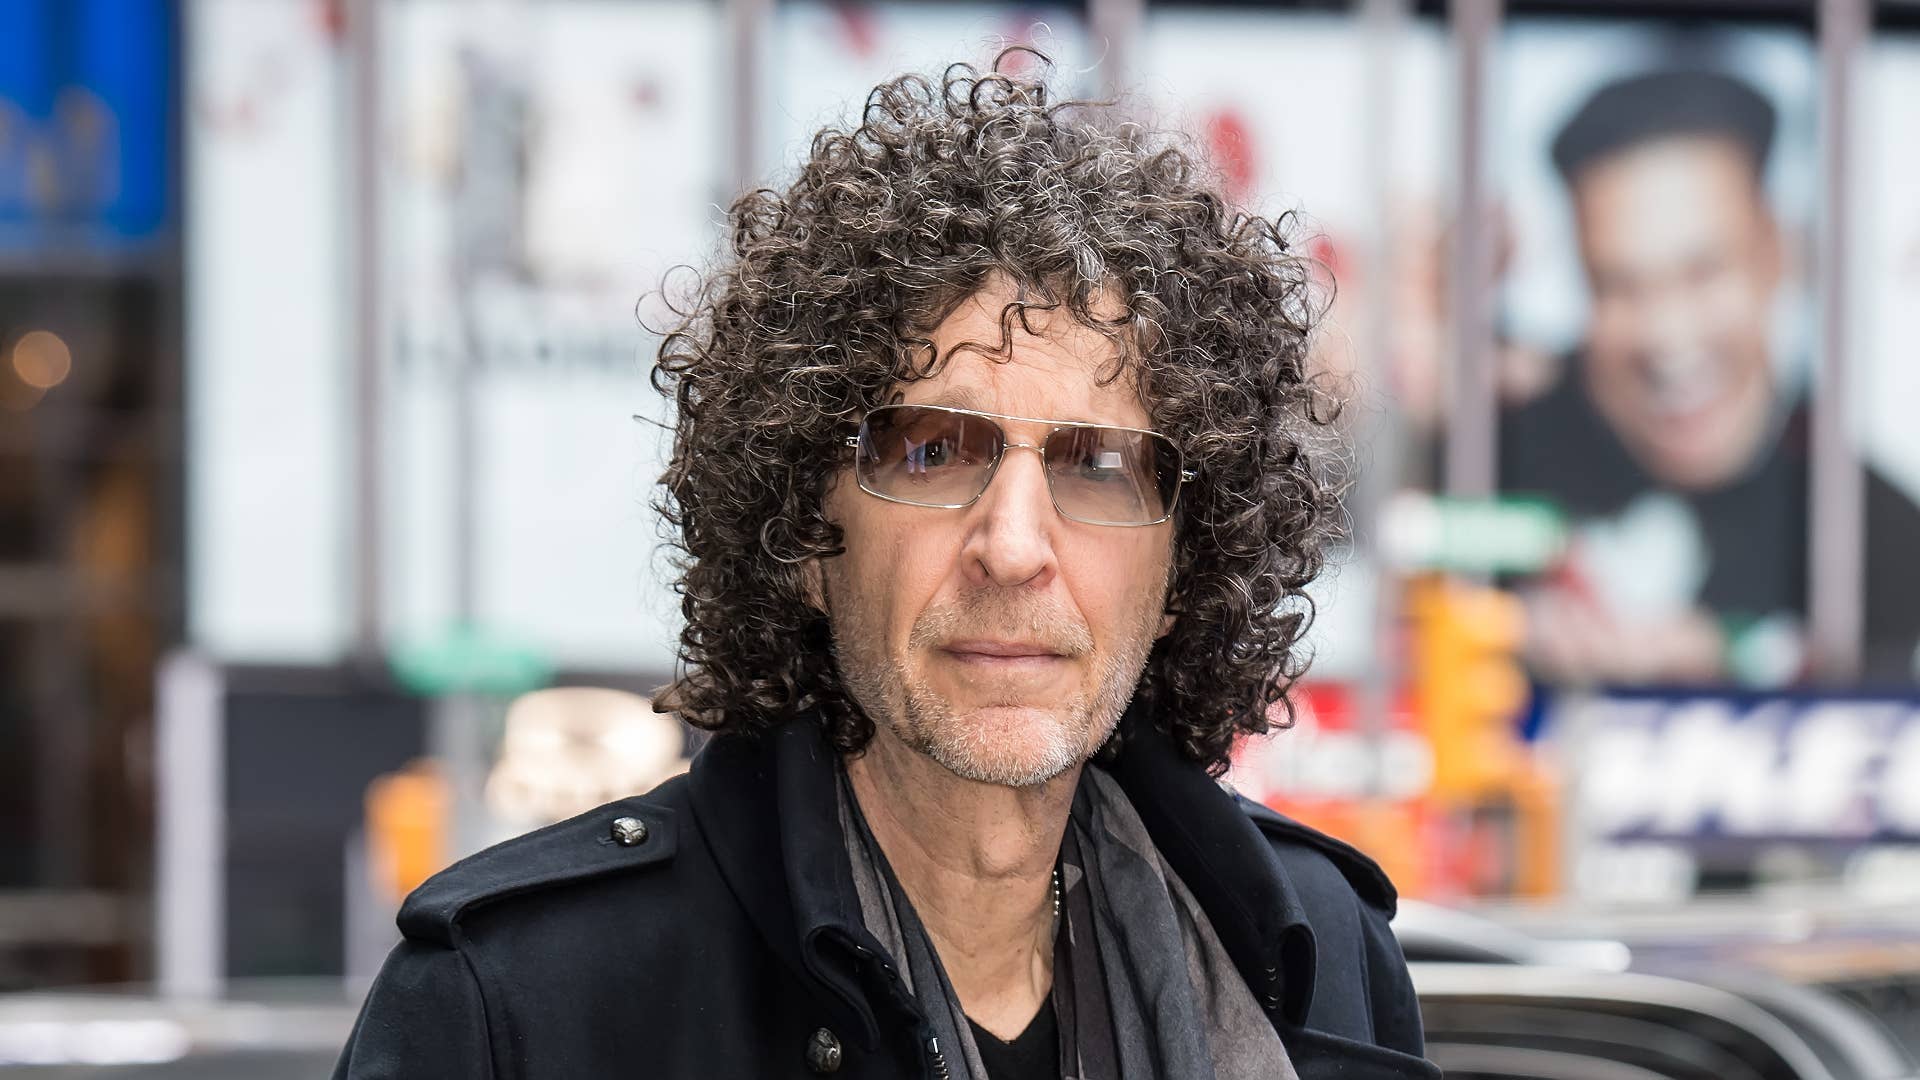 Howard Stern photographed outside in New York City.